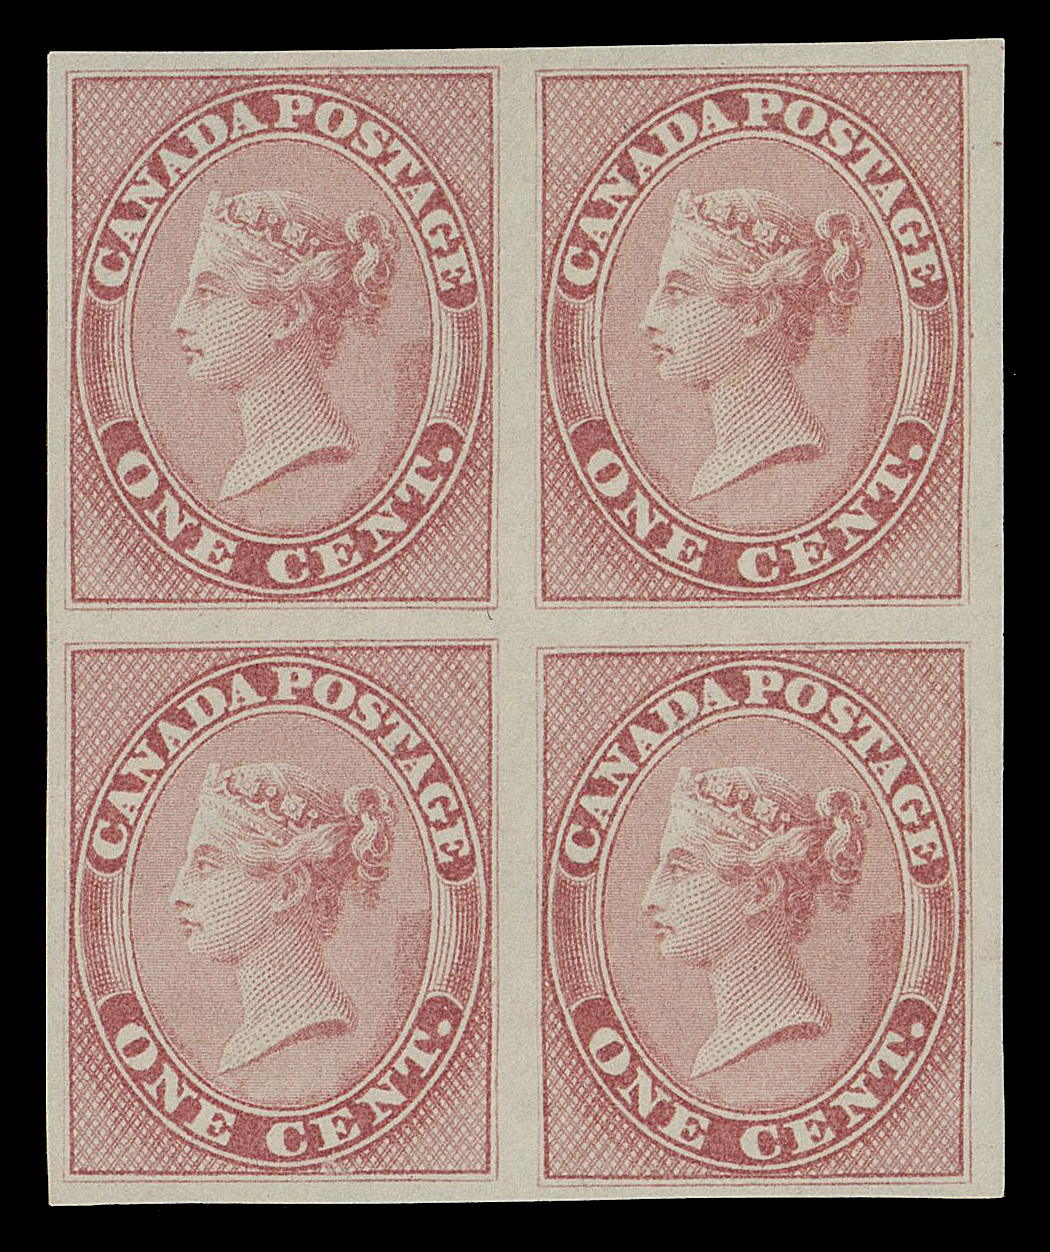 HALF PENNY AND ONE CENT  14a,An exceptional imperforate block in the distinctive shade of the issued stamp, surrounded by large margins, ungummed. One of (if not) the finest existing blocks extant, XF

Expertization: 1988 Greene Foundation certificate

Provenance: Fred Jarrett Canada 1859-1864, Sissons Sale 169, December 1959; Lot 16

Brigham